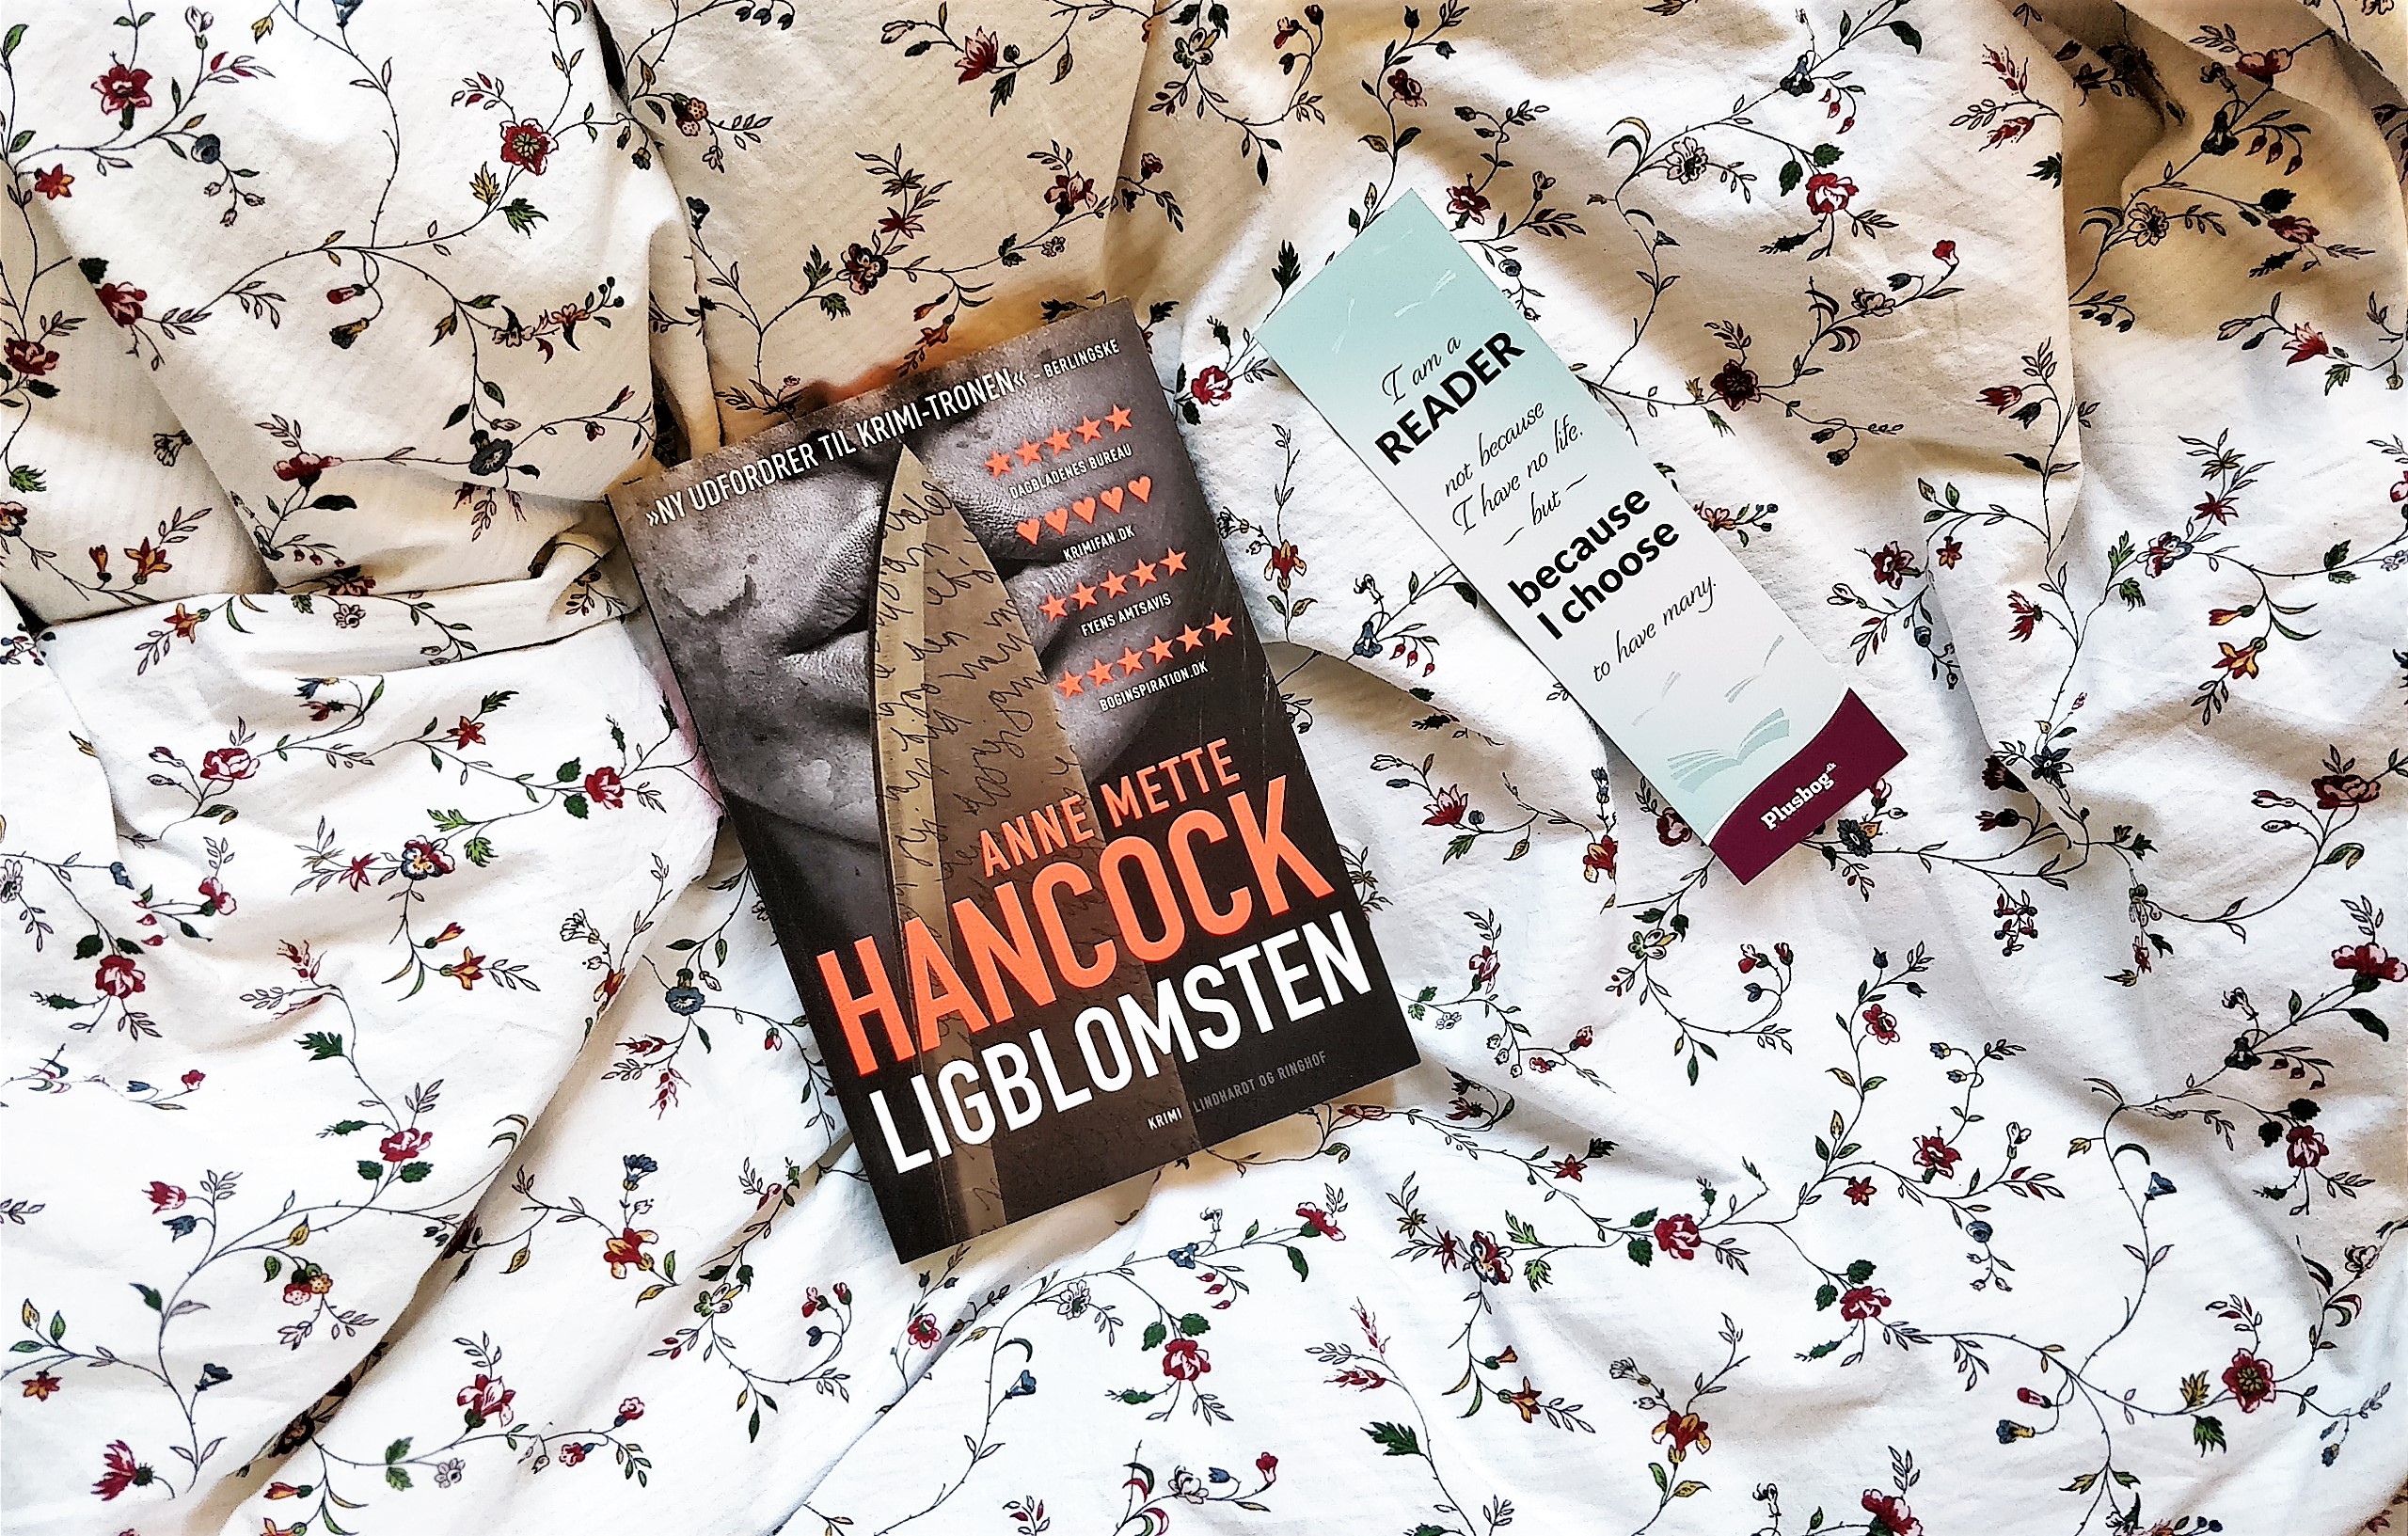 The crime fiction book Ligblomsten by Anne Mette Hancock on a flowery background next to a bookmark